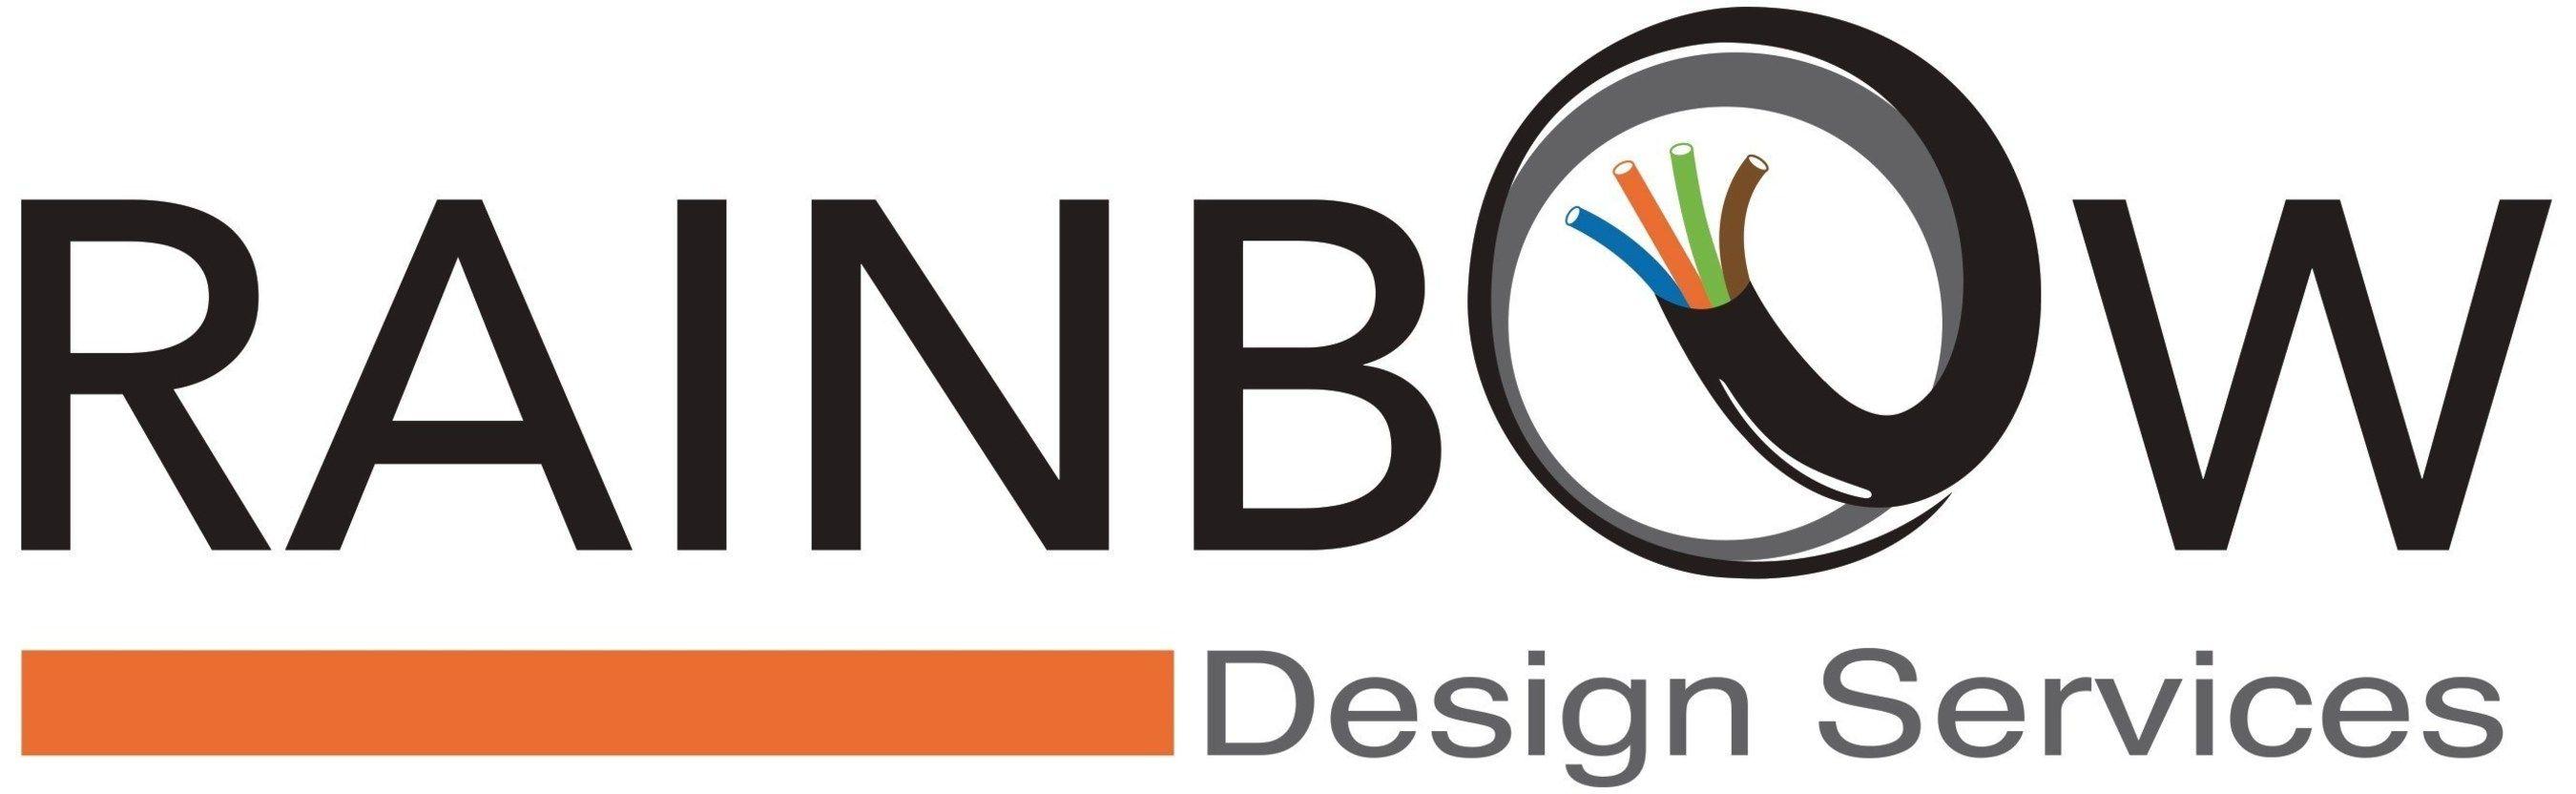 Rainbow Corporate Logo - New Brand Identity With Refreshed Corporate Logo